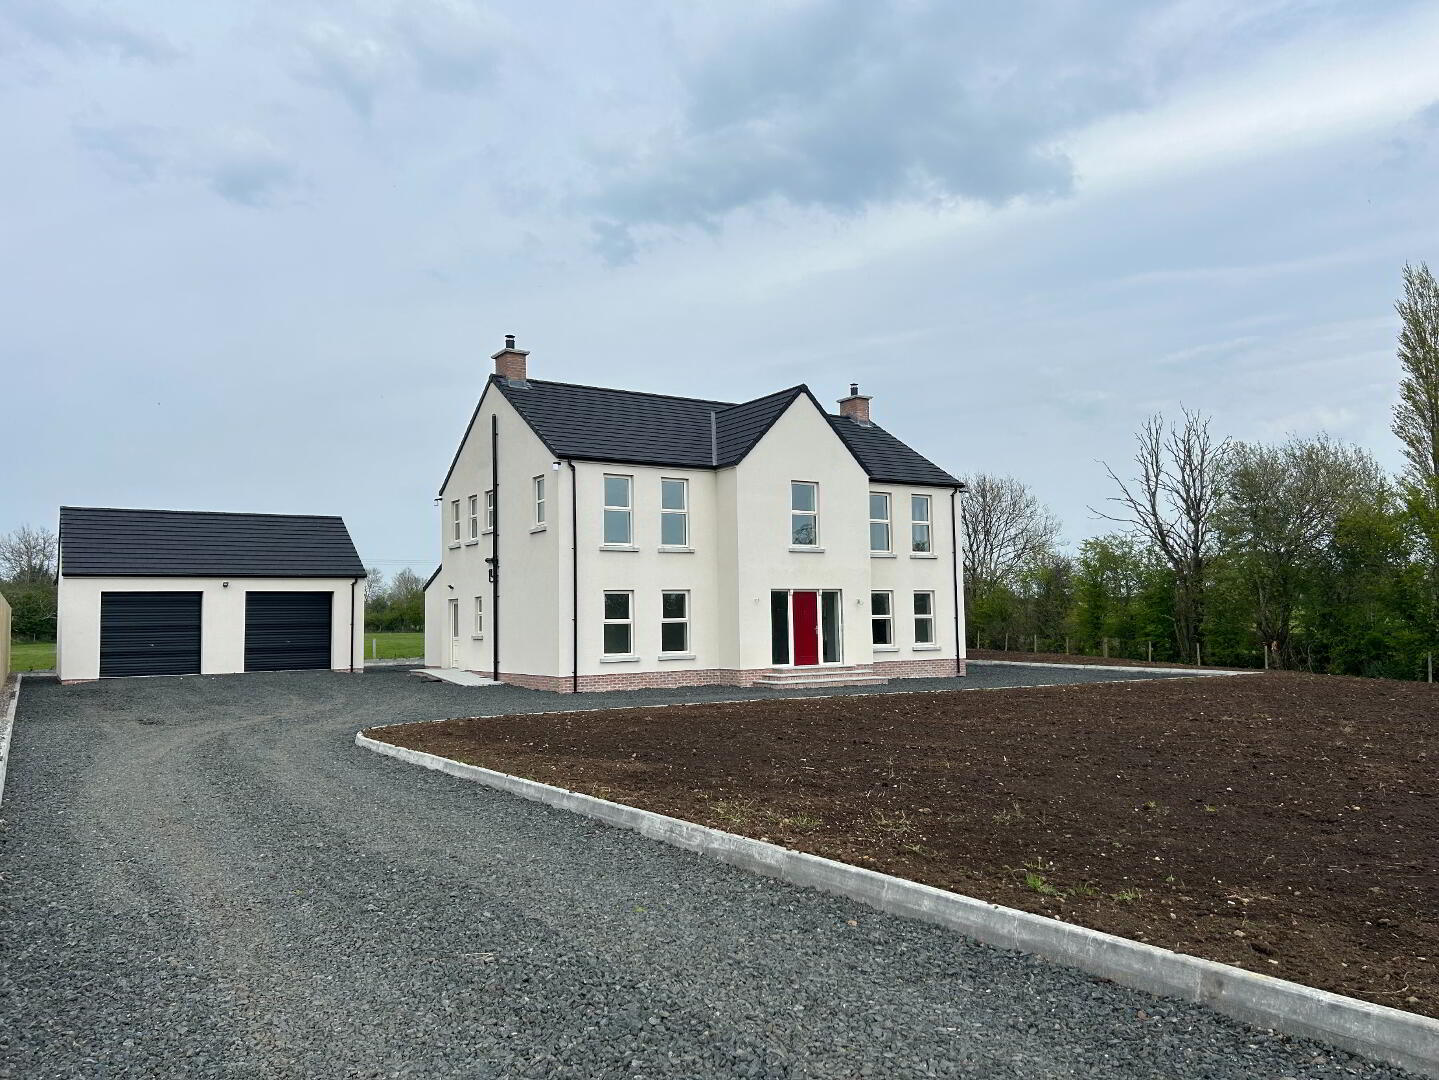 New Build & Double Garage, 108a Whitesides Road